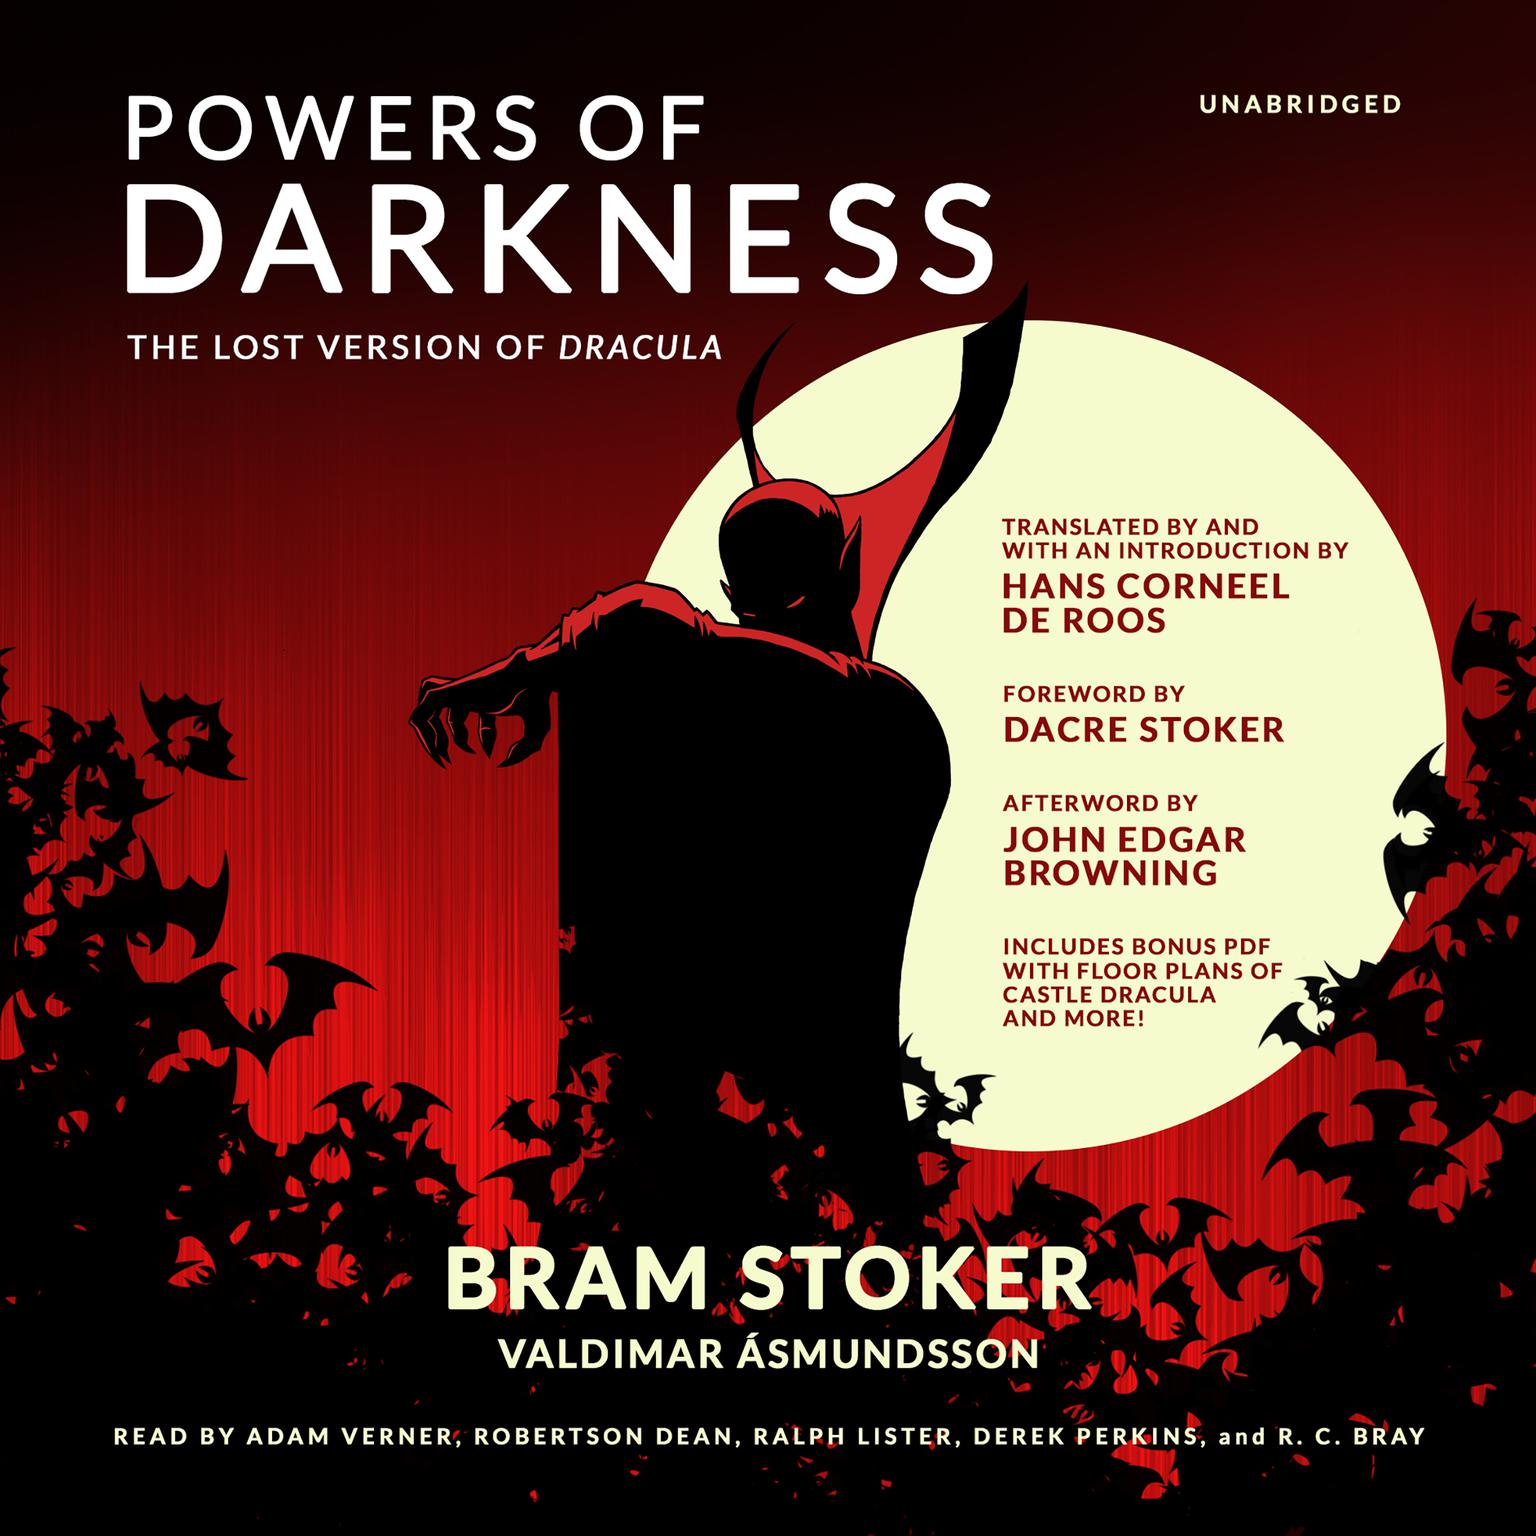 Powers of Darkness: The Lost Version of Dracula Audiobook, by Bram Stoker